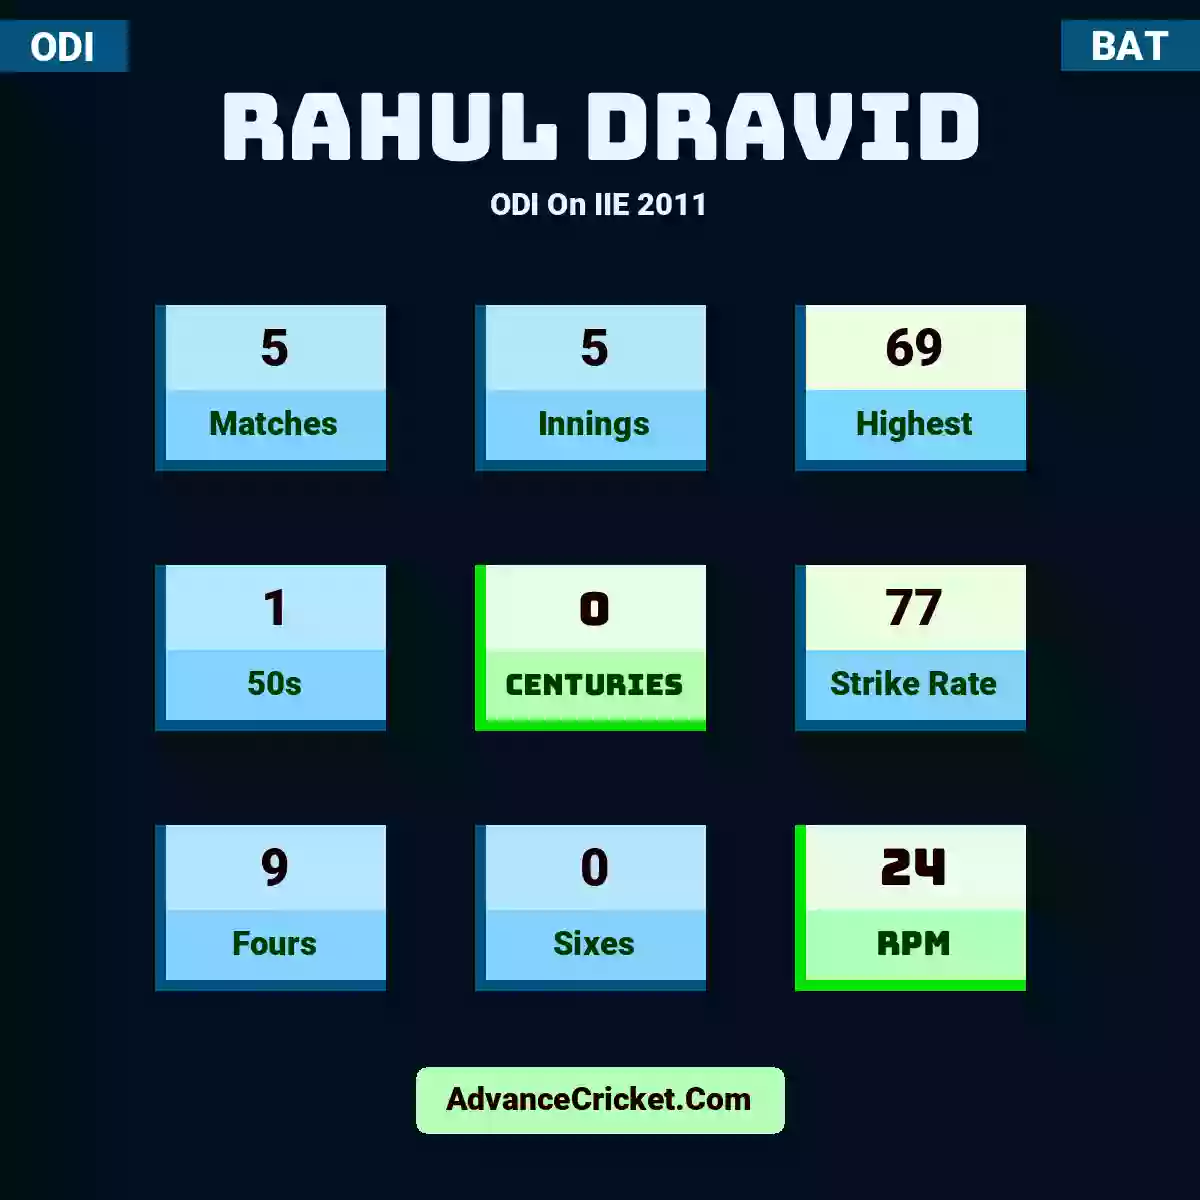 Rahul Dravid ODI  On IIE 2011, Rahul Dravid played 5 matches, scored 69 runs as highest, 1 half-centuries, and 0 centuries, with a strike rate of 77. R.Dravid hit 9 fours and 0 sixes, with an RPM of 24.